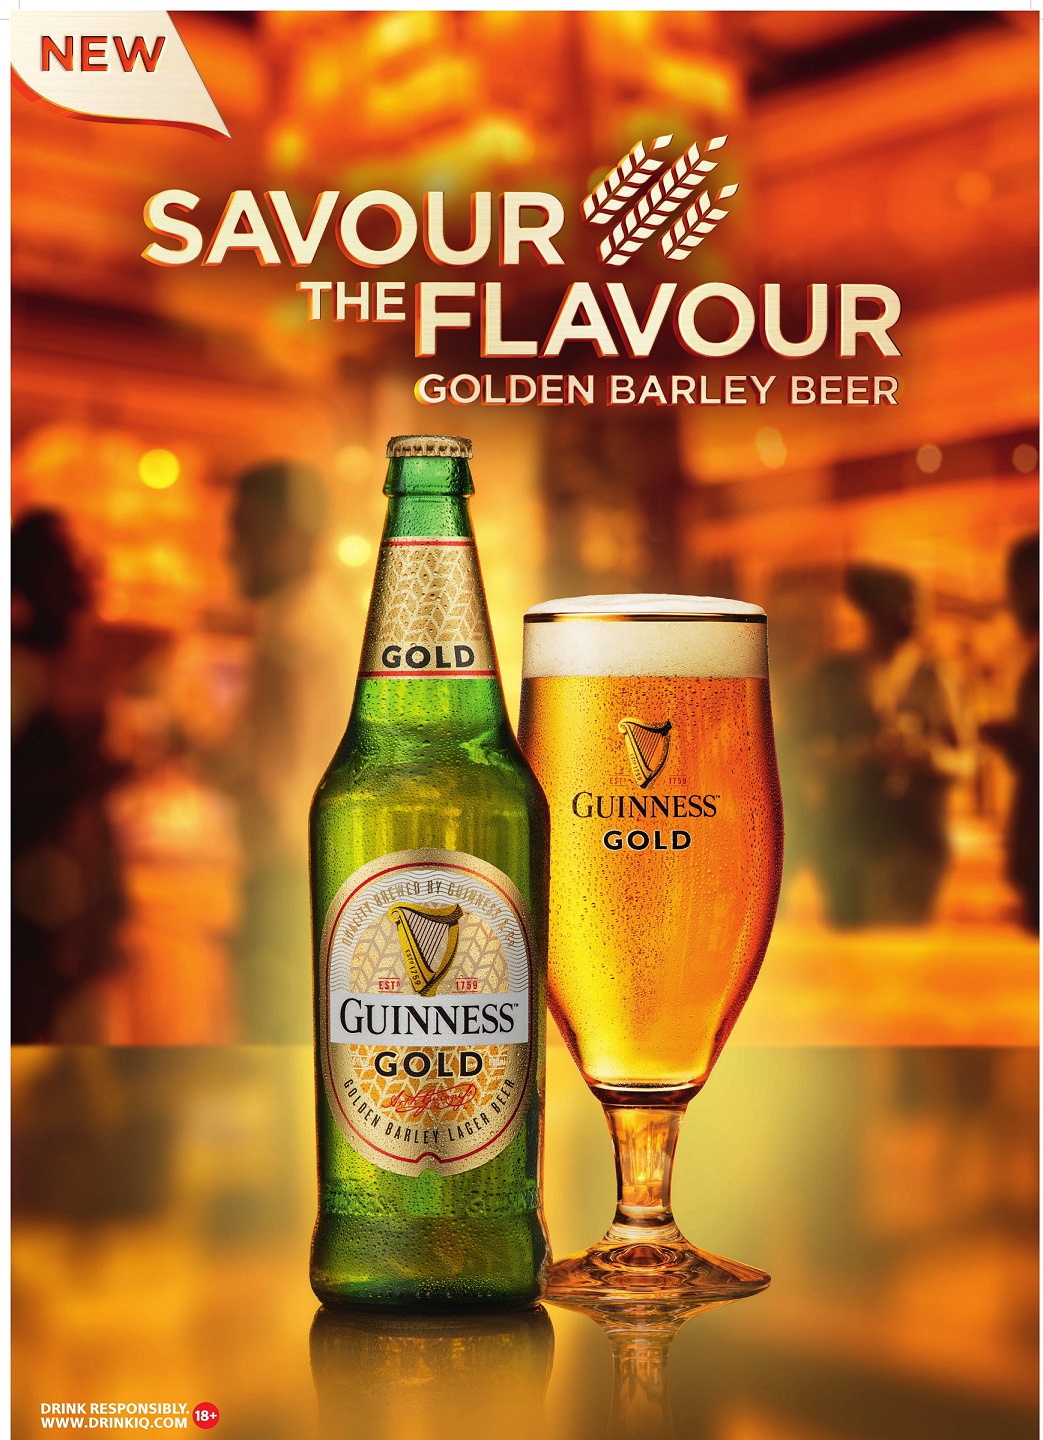 Celebrate life’s golden moments with Guinness Gold from the house of Guinness